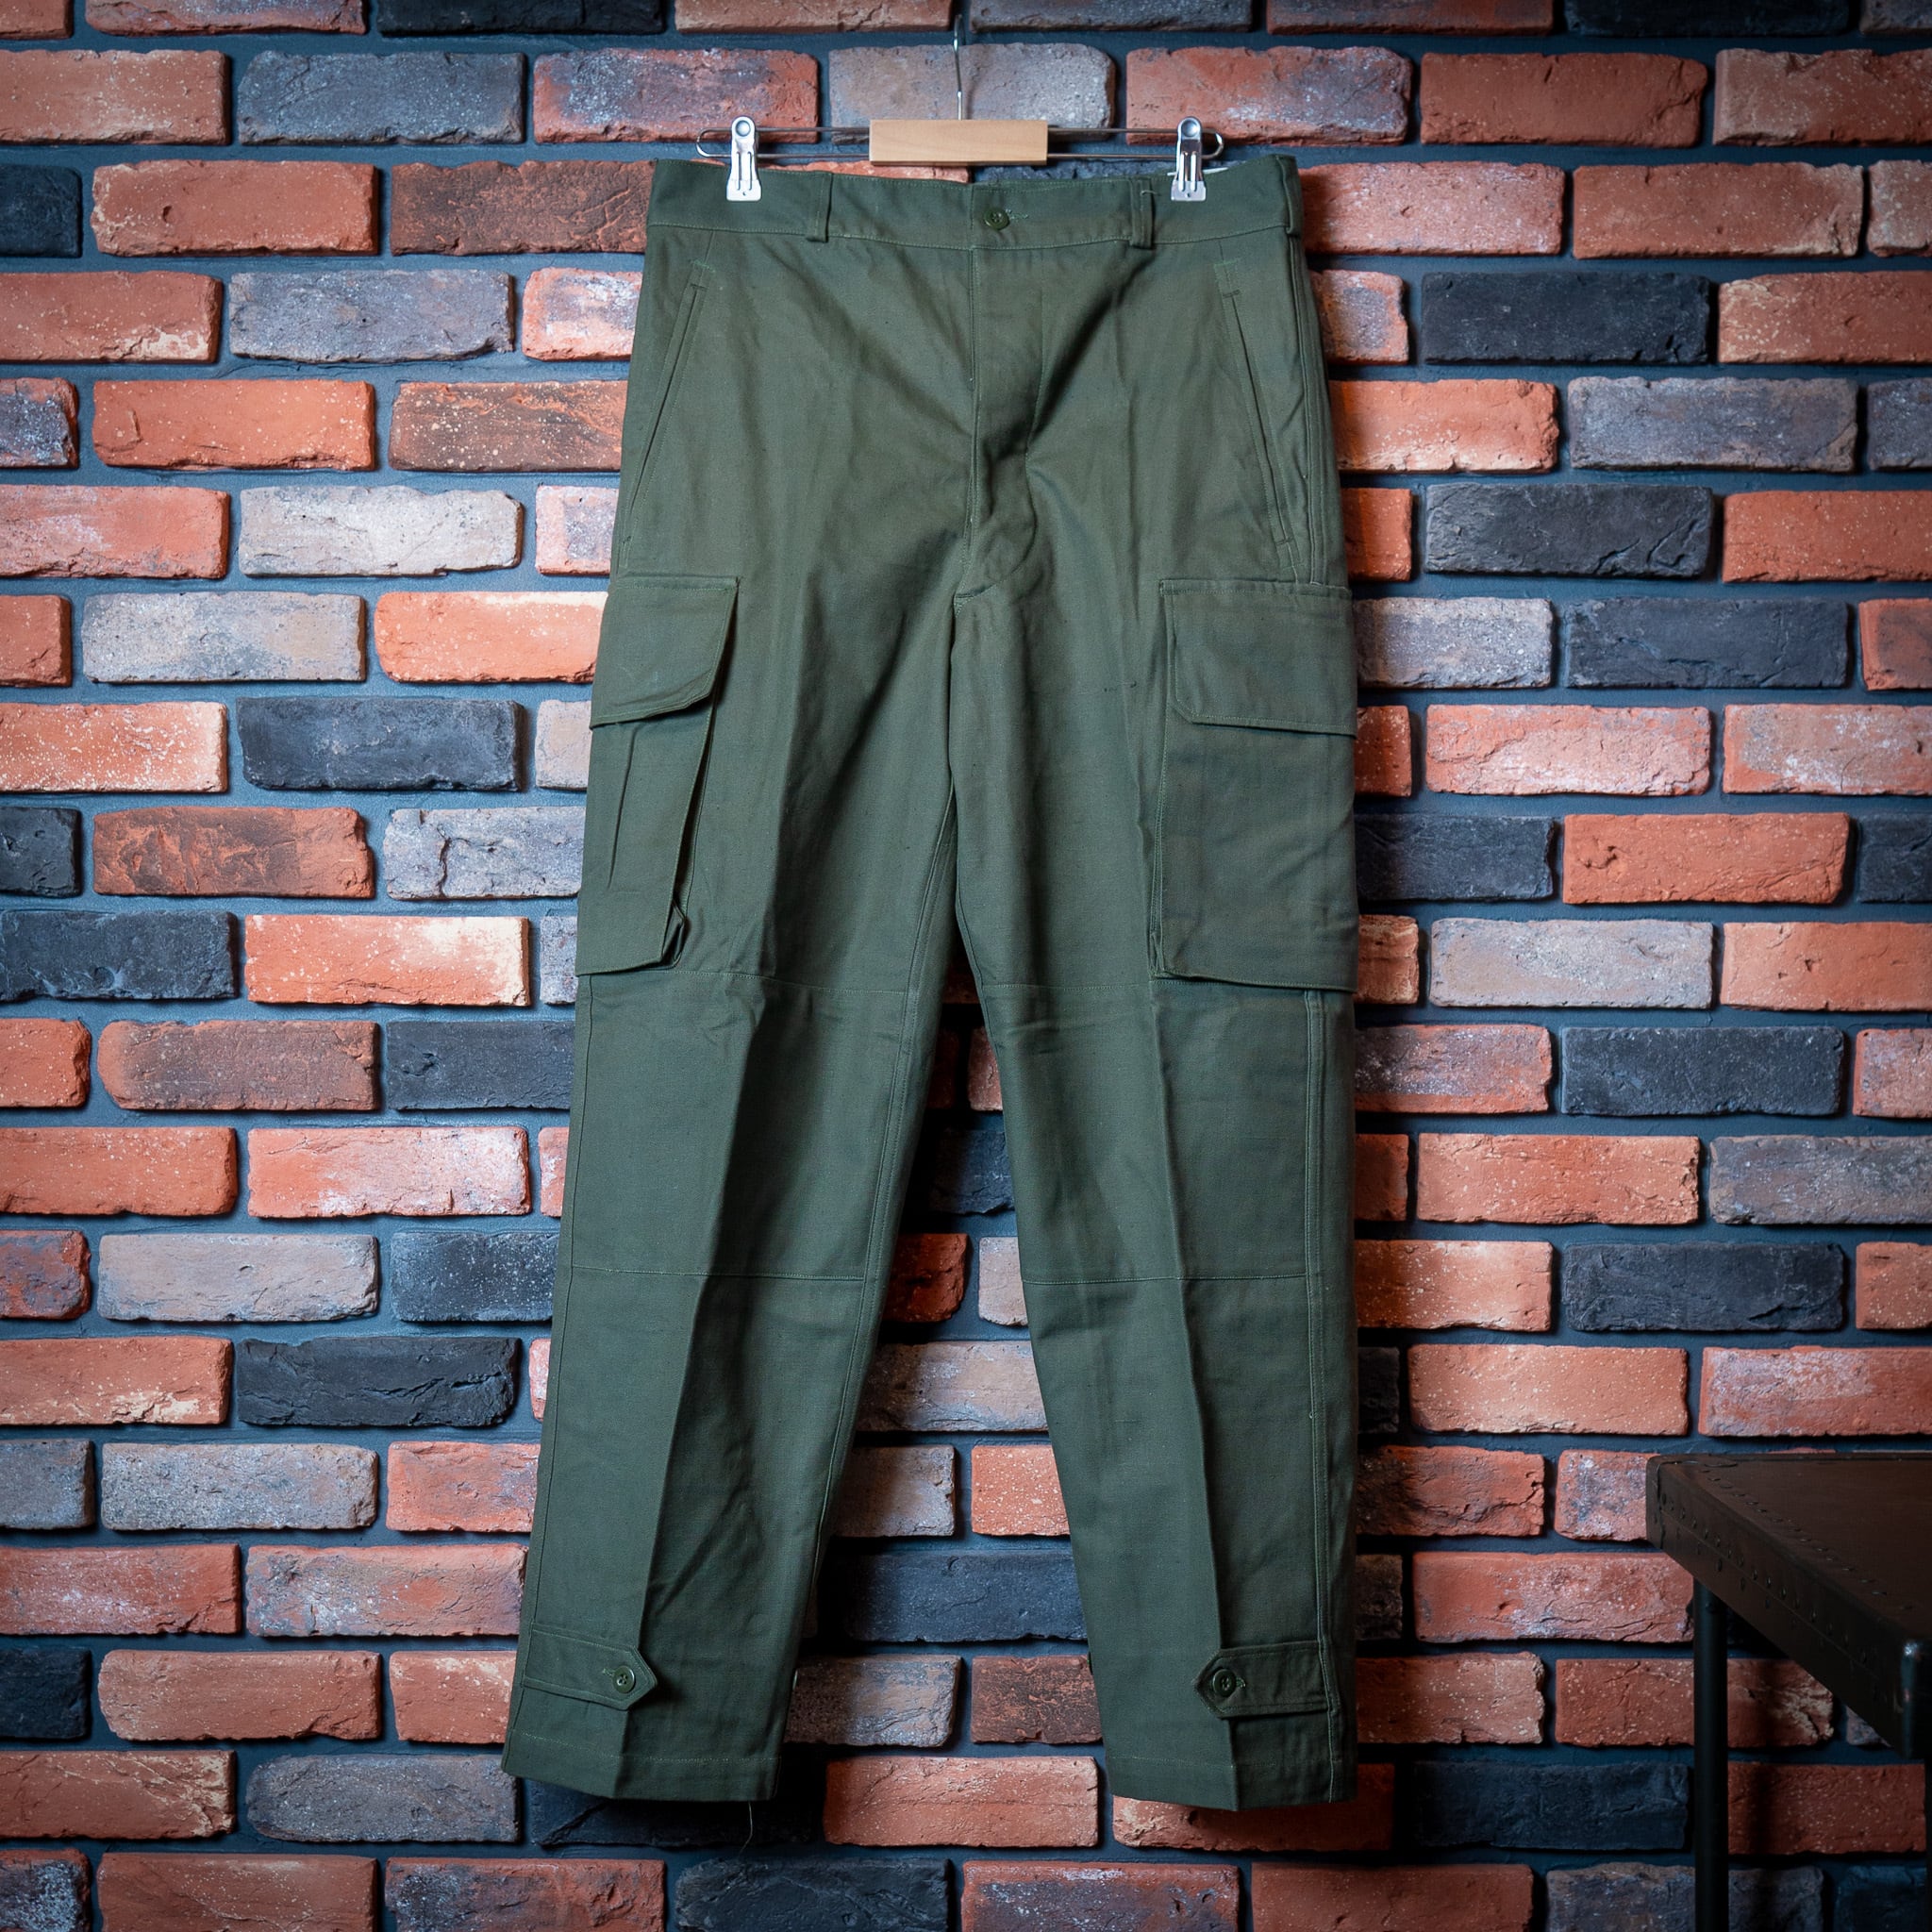 【DEADSTOCK】French Air Force M-47 Trousers 実物 フランス空軍 M47 カーゴパンツ デッドストック 希少  レア | FAR EAST SIGNAL powered by BASE